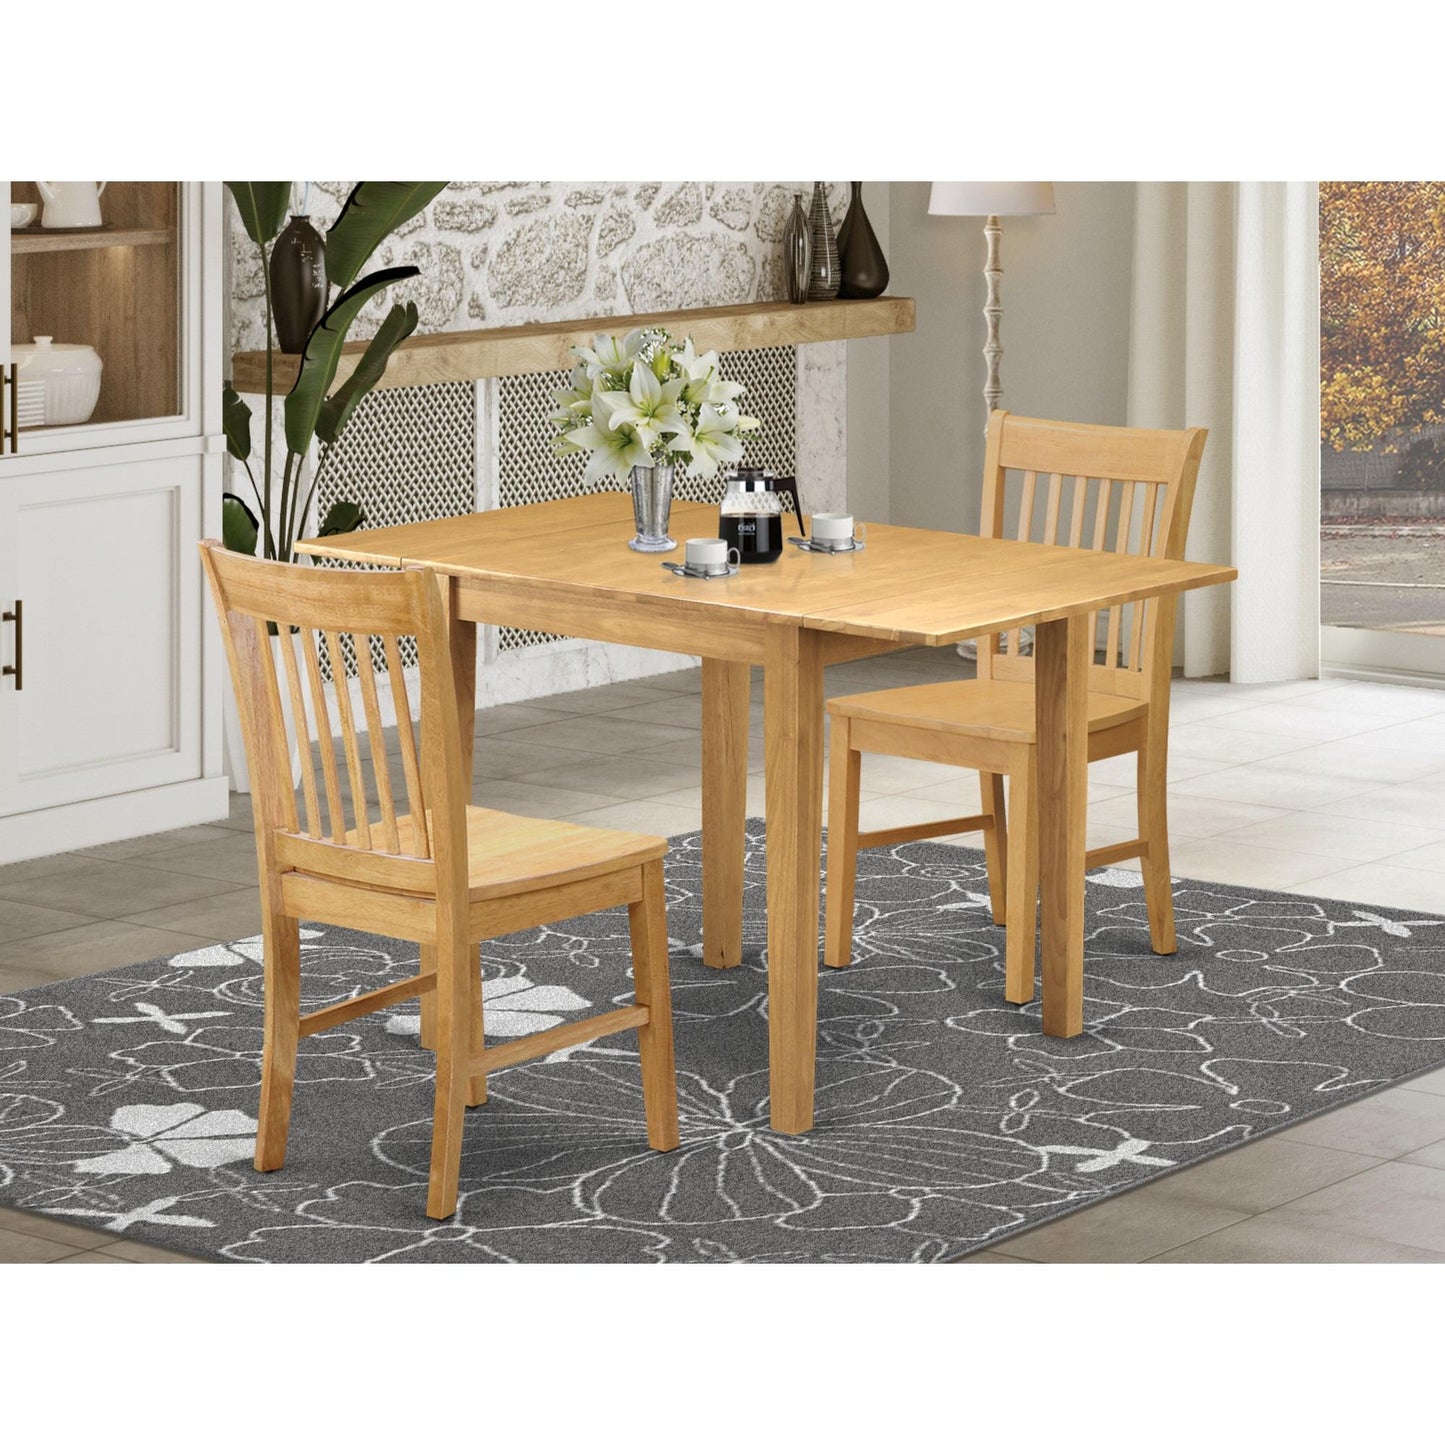 Dining Set: 3 Piece Lath Back Dining Table Set